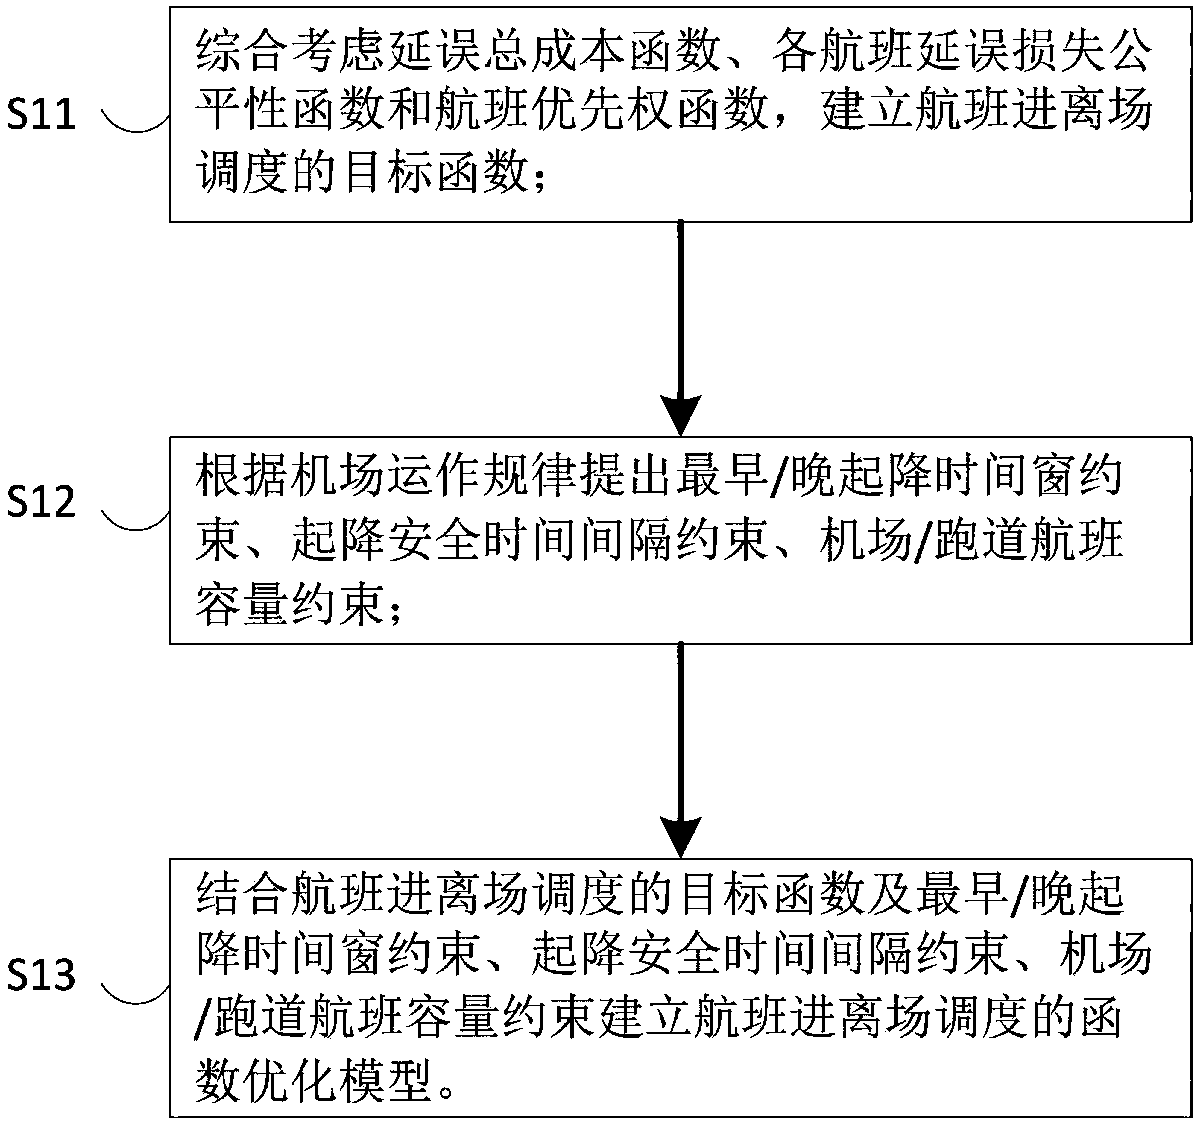 Flight entry/departure scheduling optimization method and system based on historical data driving